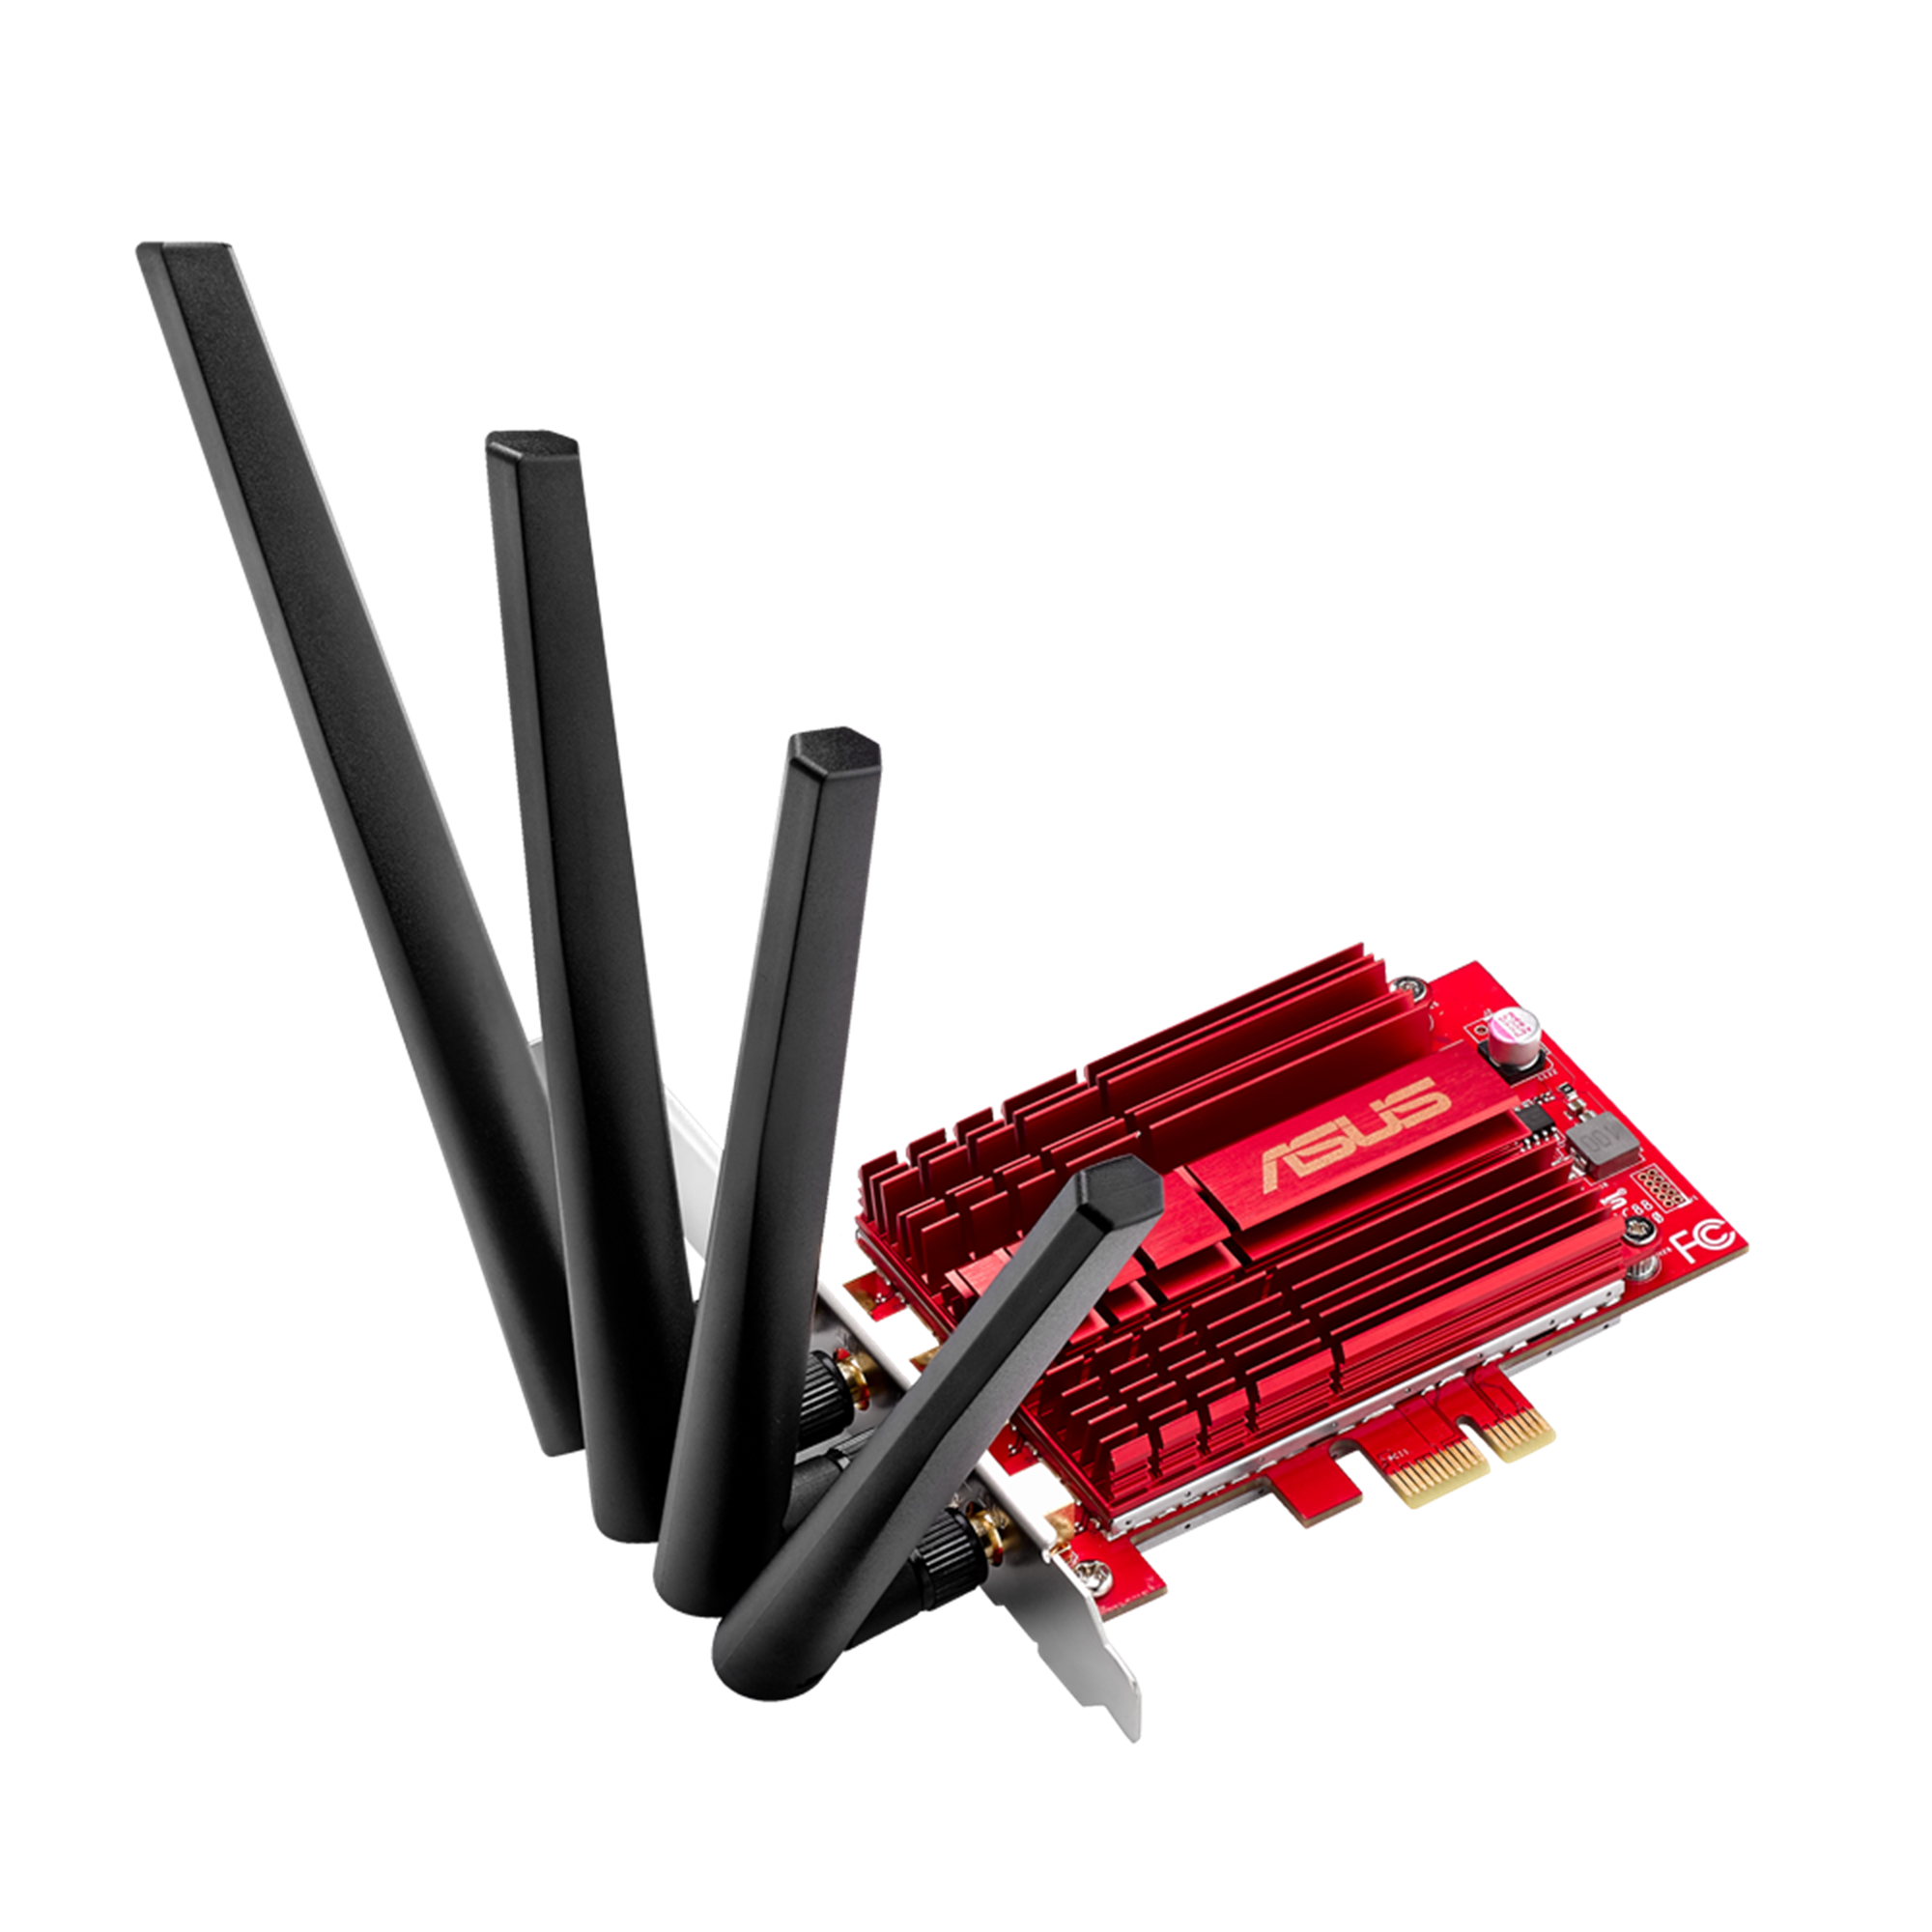 x64 driver for wireless iap asus t-100